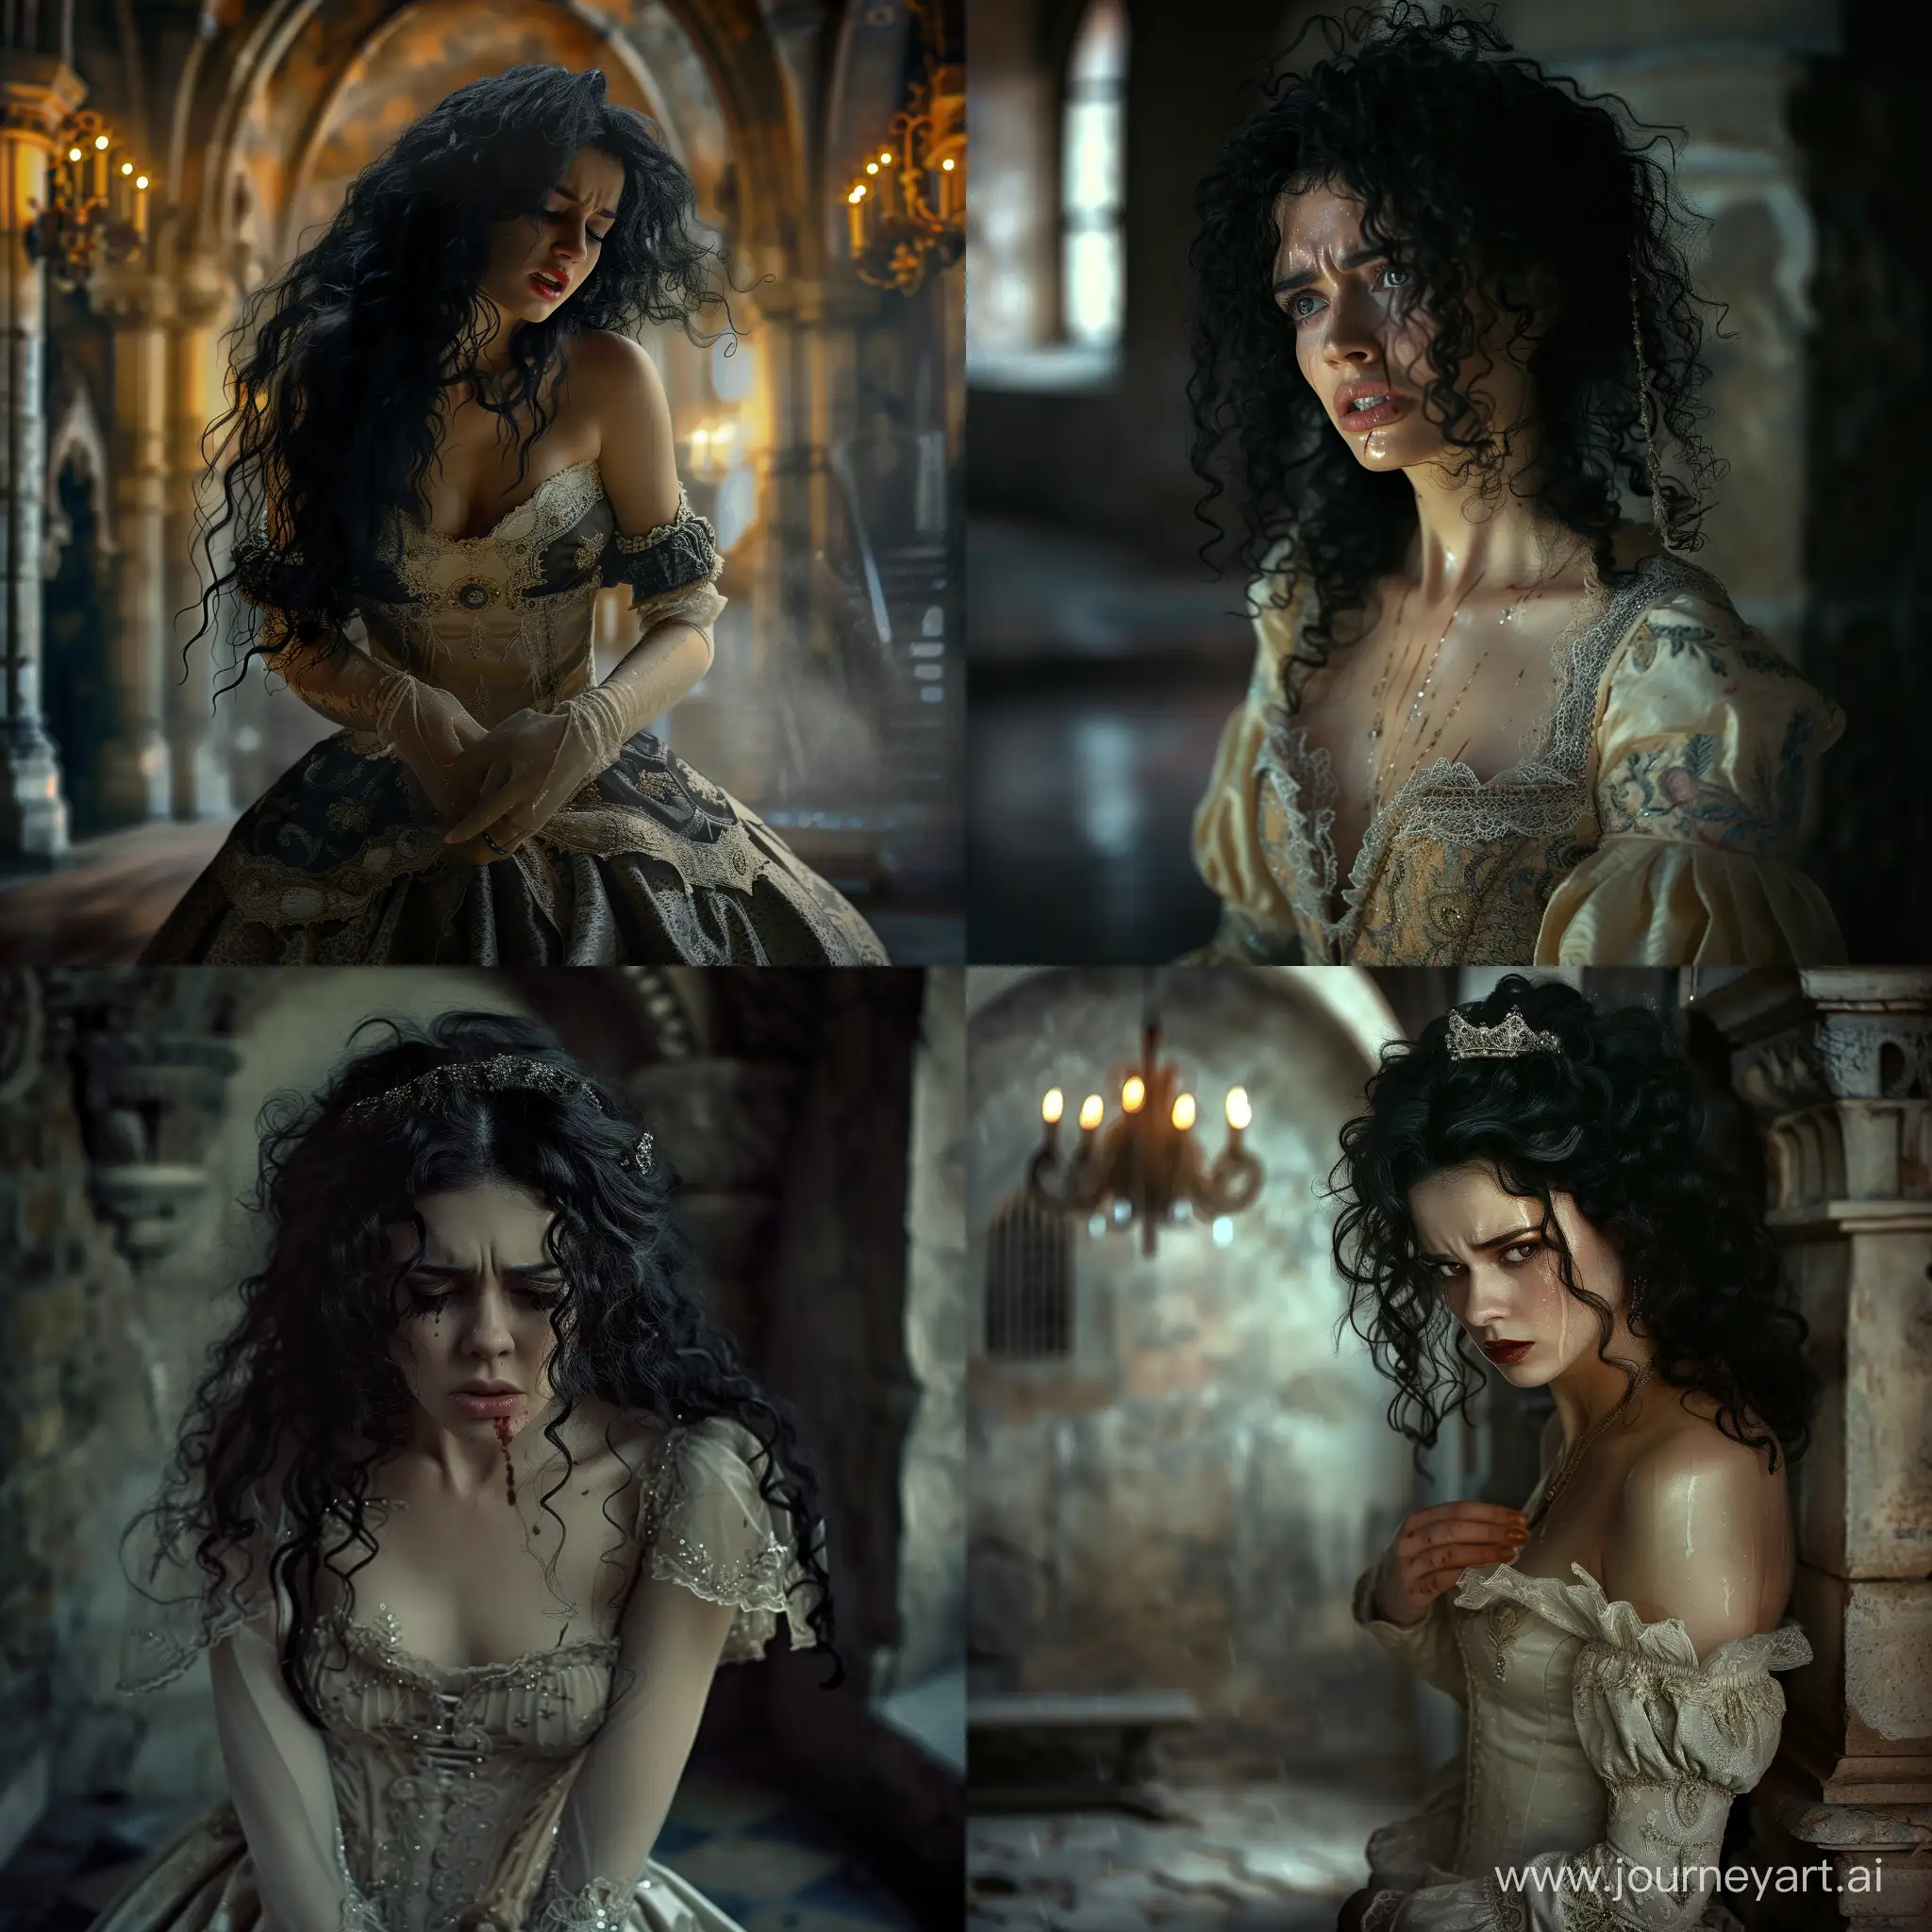 tormented woman with black curls in a beautiful dress, castle chamber, crying, fantasy, darkness